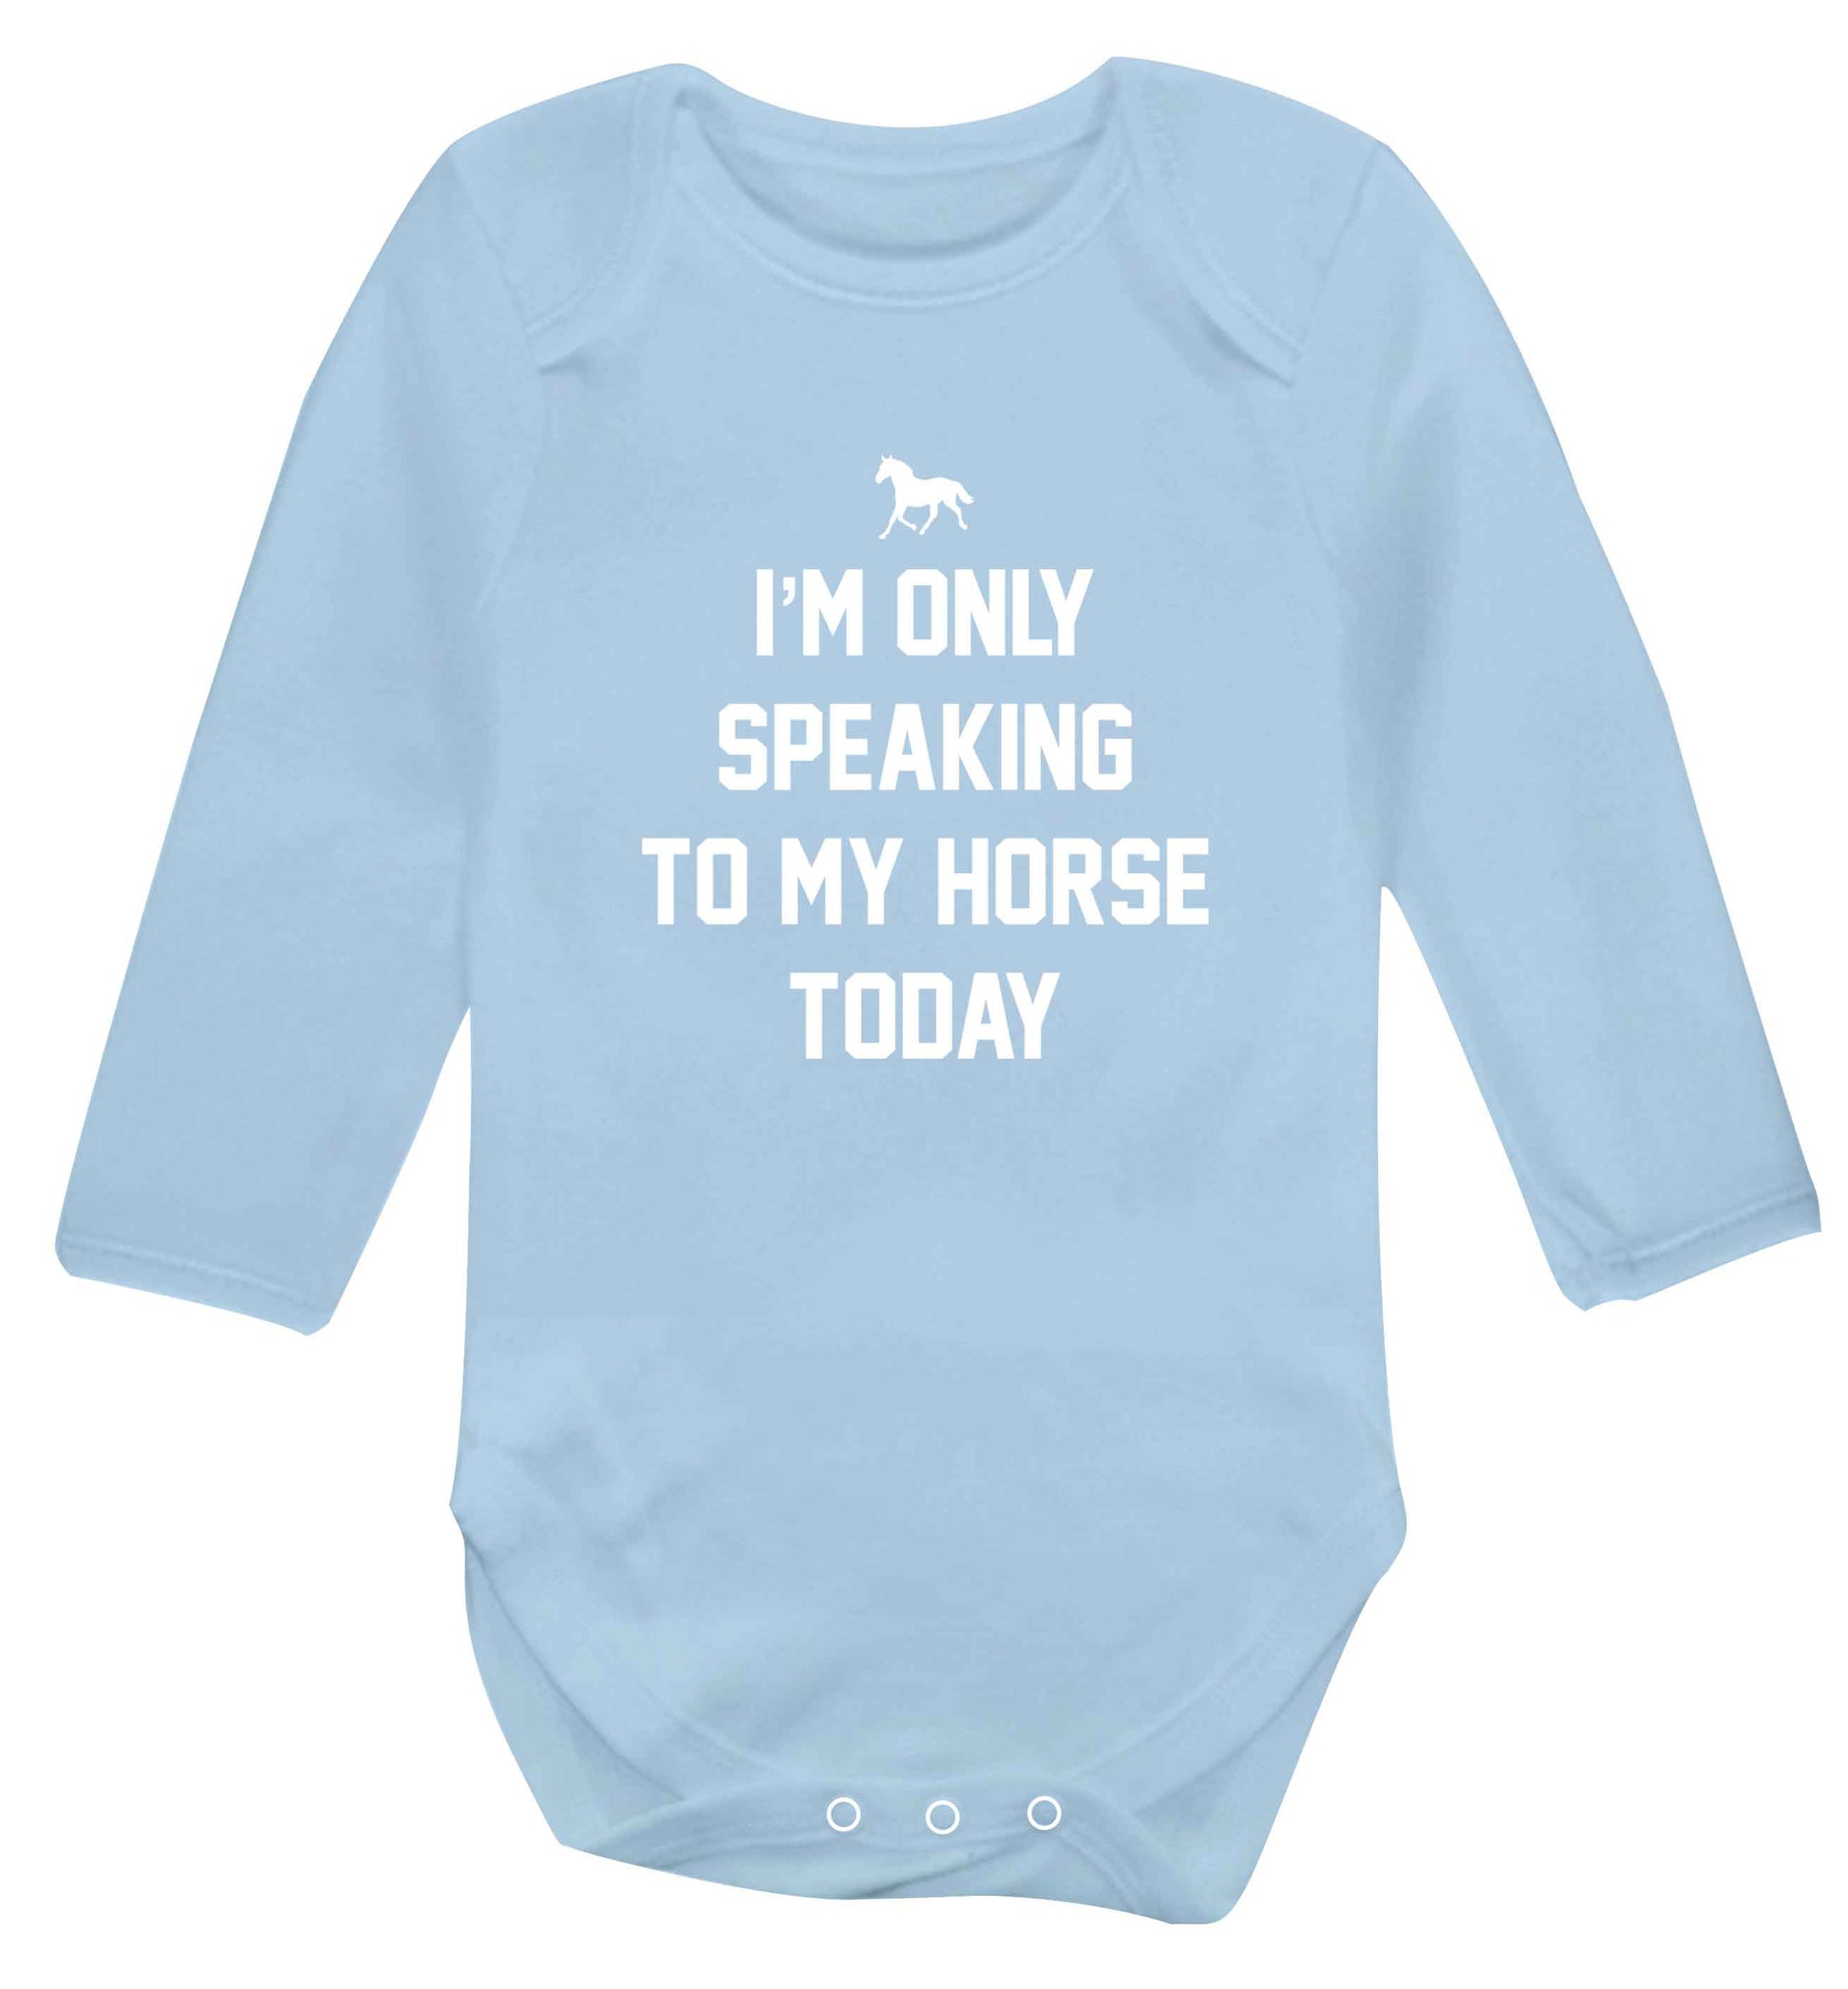 I'm only speaking to my horse today baby vest long sleeved pale blue 6-12 months